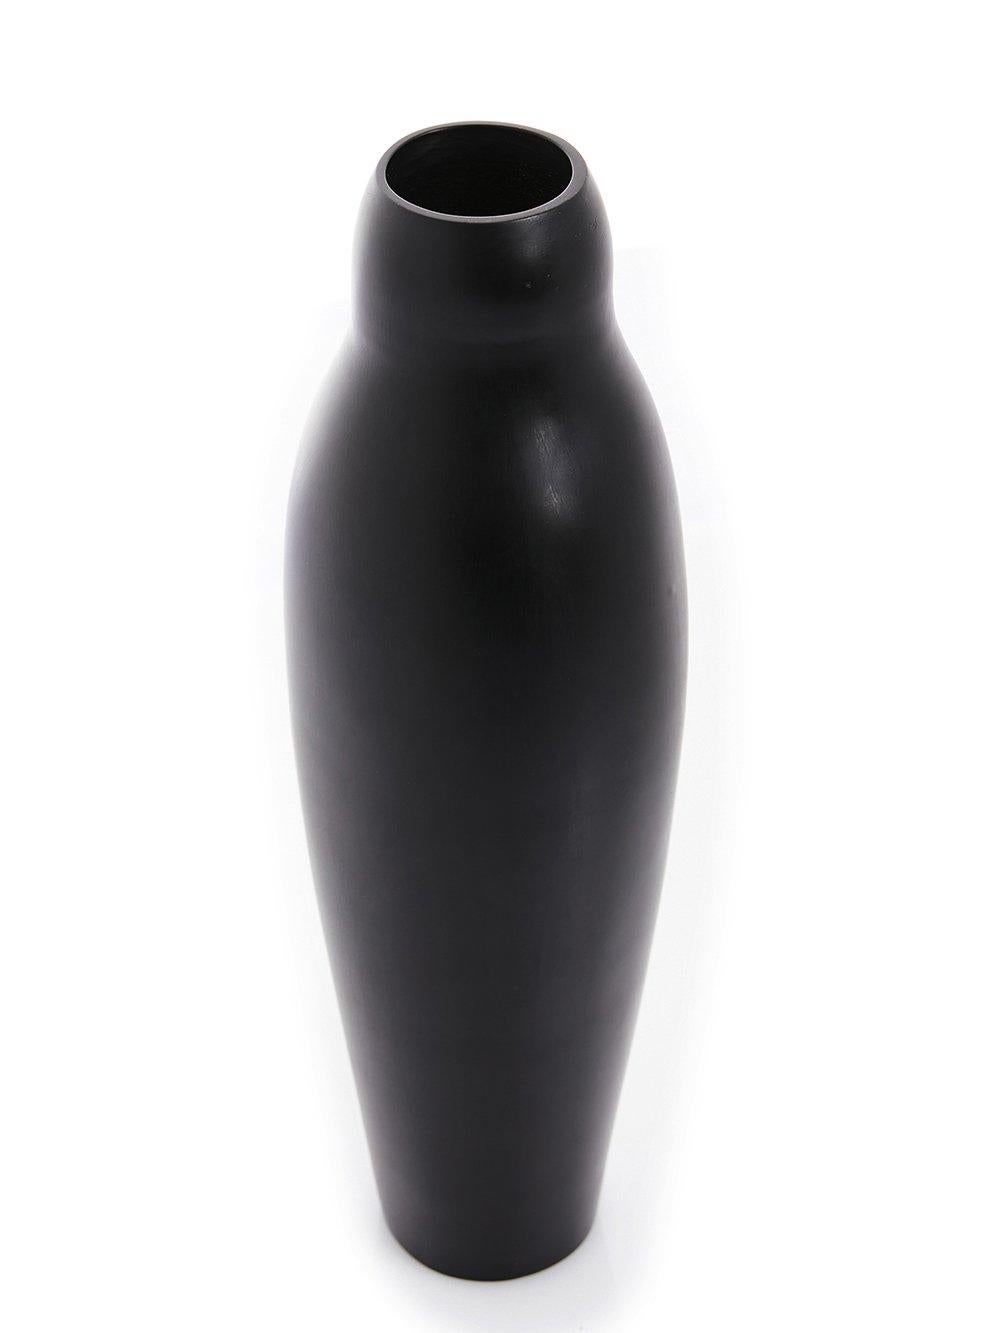 Bronze Gourd vase by Rick Owens
2019
Dimensions: L 11 x W 11 x H 36.7 cm
Materials: Bronze
Weight: 4.5 kg

Rick Owens is a California-born fashion and furniture has developed a unique style that he describes as “luxe minimalism.”
Though his